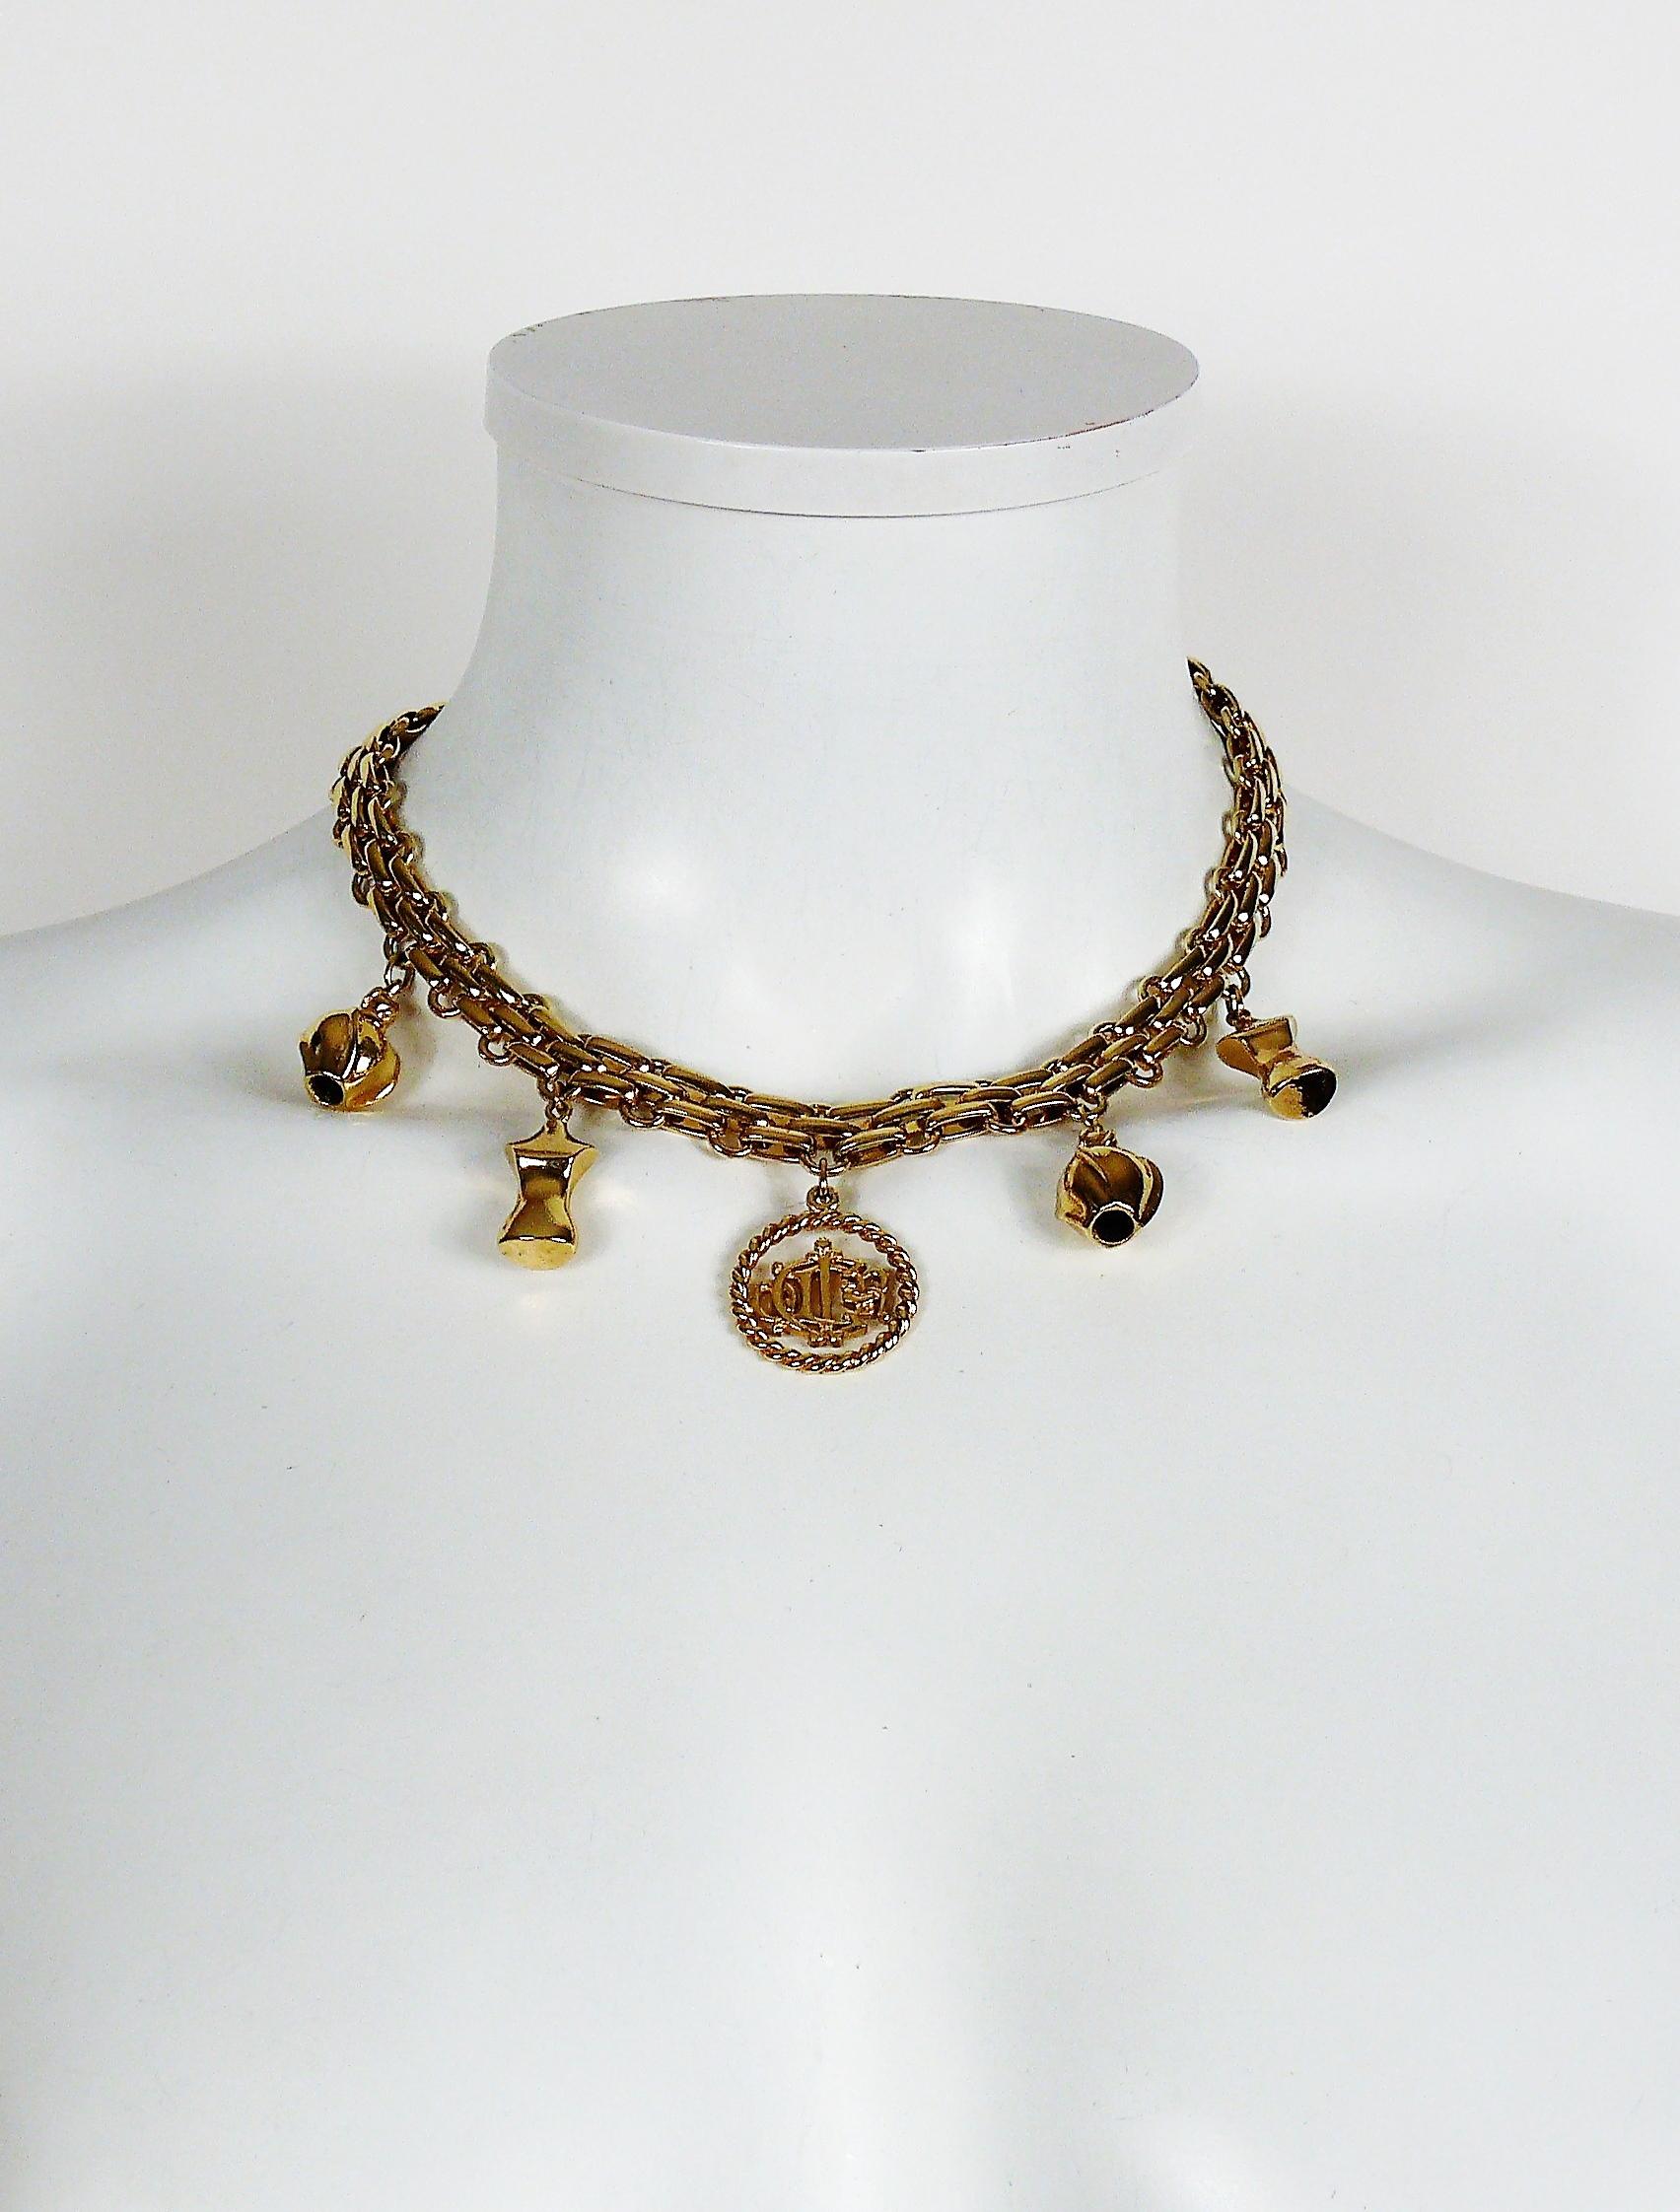 CHRISTIAN DIOR vintage gold toned necklace featuring various charms : perfume bottles, mannequin busts, CHRISTIAN DIOR insigna coin.

Embossed CHR. DIOR ©.
Germany.

Indicative measurements : length approx. 41 cm (16.14 inches).

NOTES
- This is a